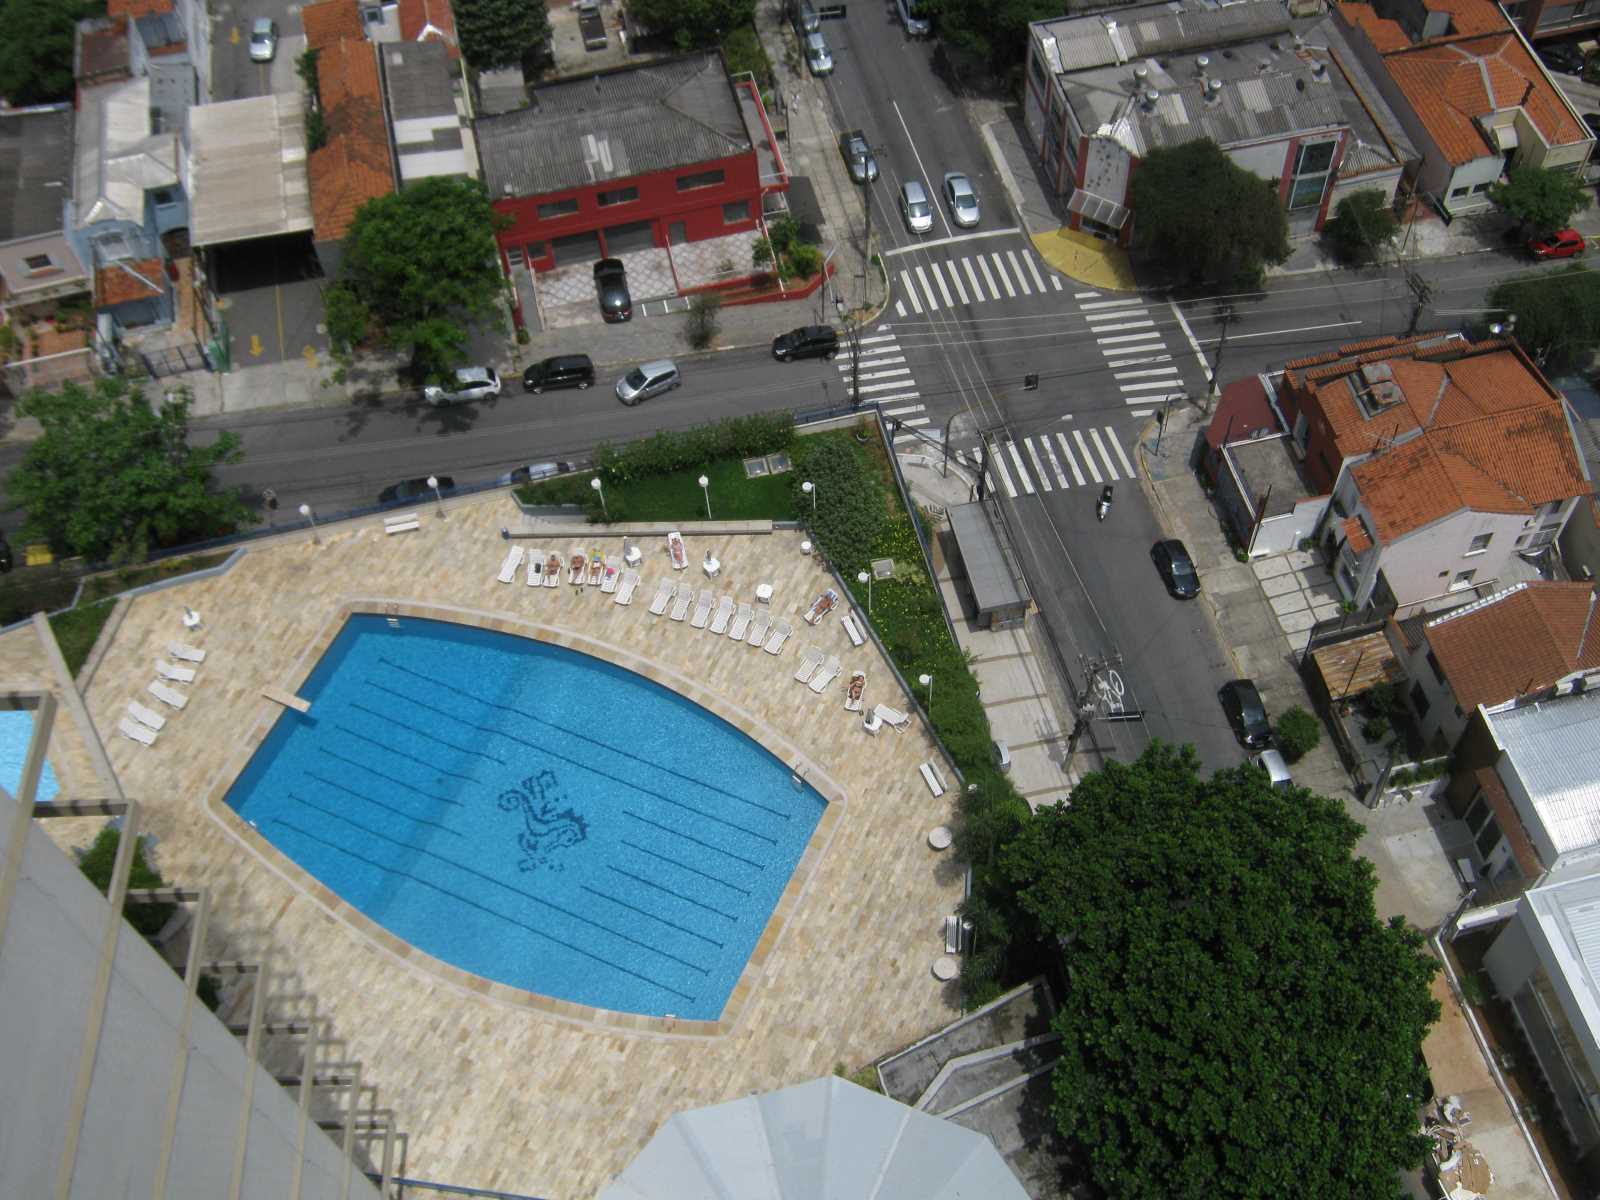 Swimming pool of a well-protected condominium complex in Sao Paulo.